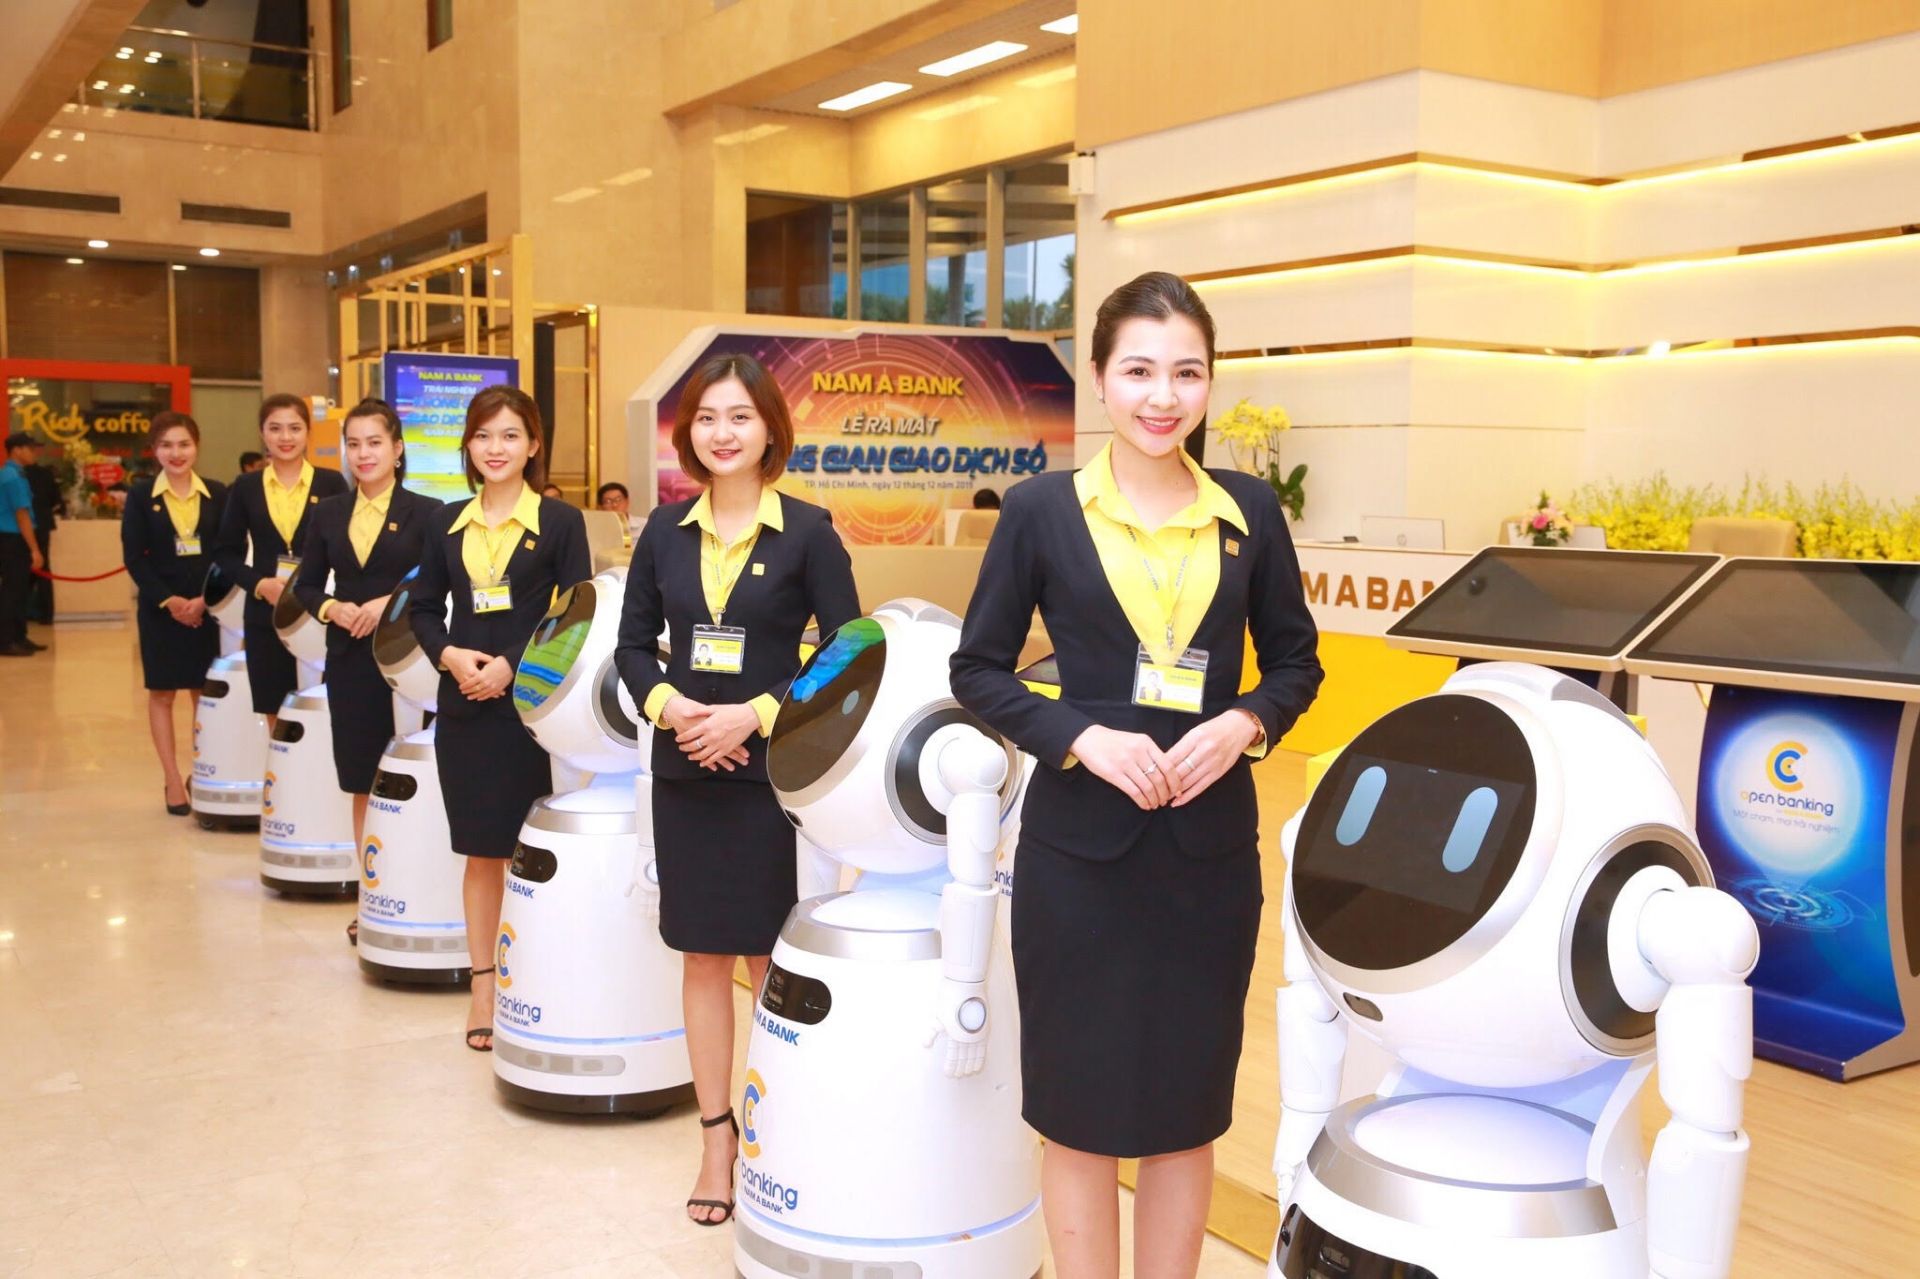 Nam A Bank officially launches Vietnam’s first banking robot